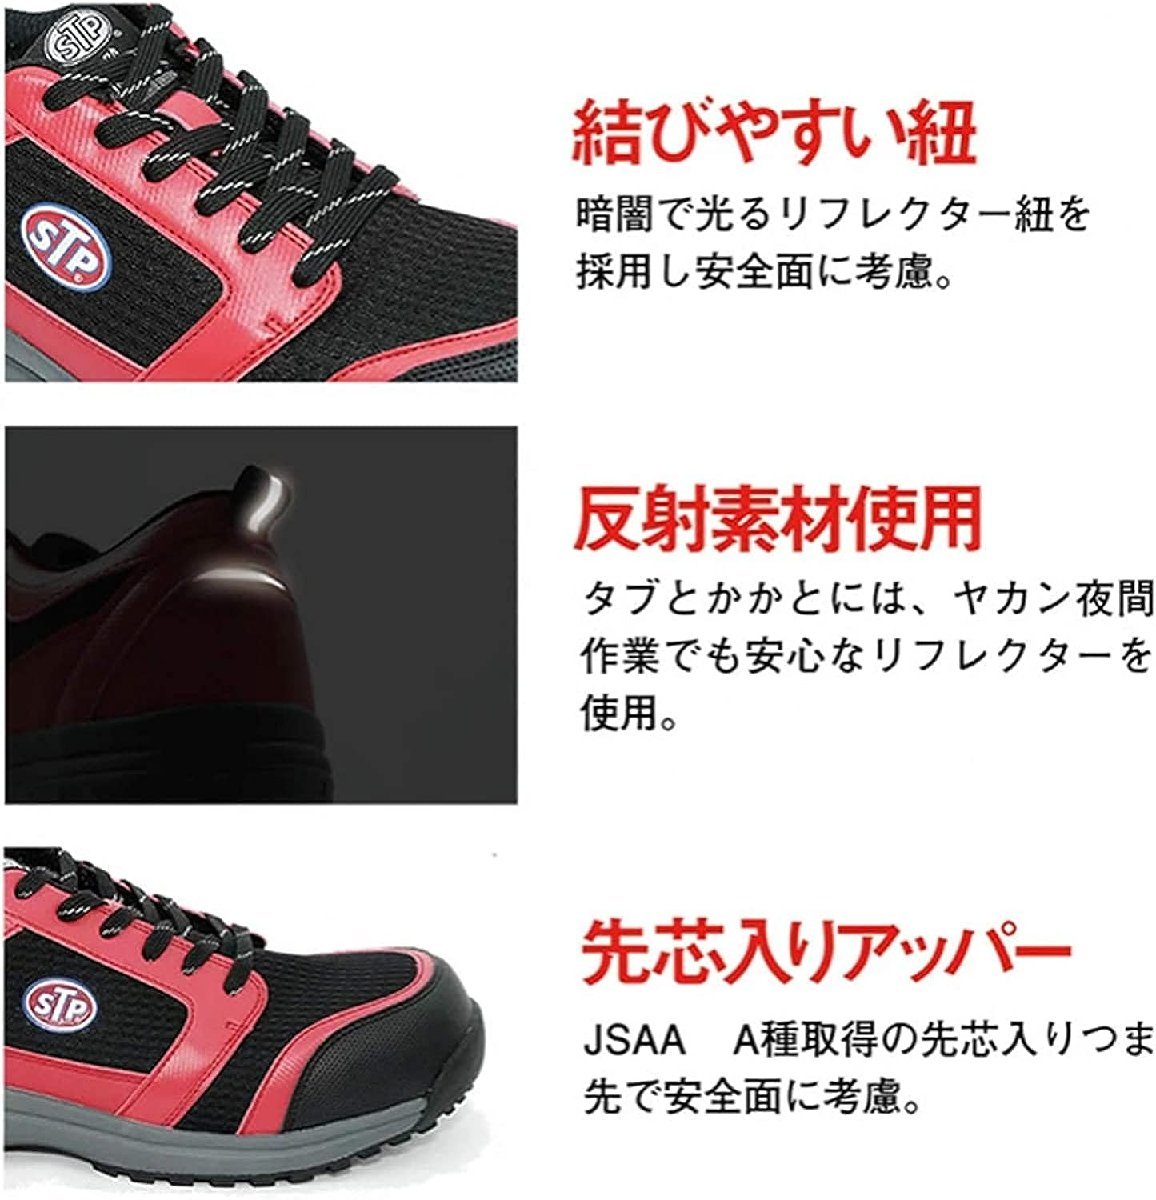 [STP/ mesh Work shoes ]*MESH WORK SHOES cord (himo) type / blue 29cm* sneakers type light weight safety shoes JSAA A kind acquisition 